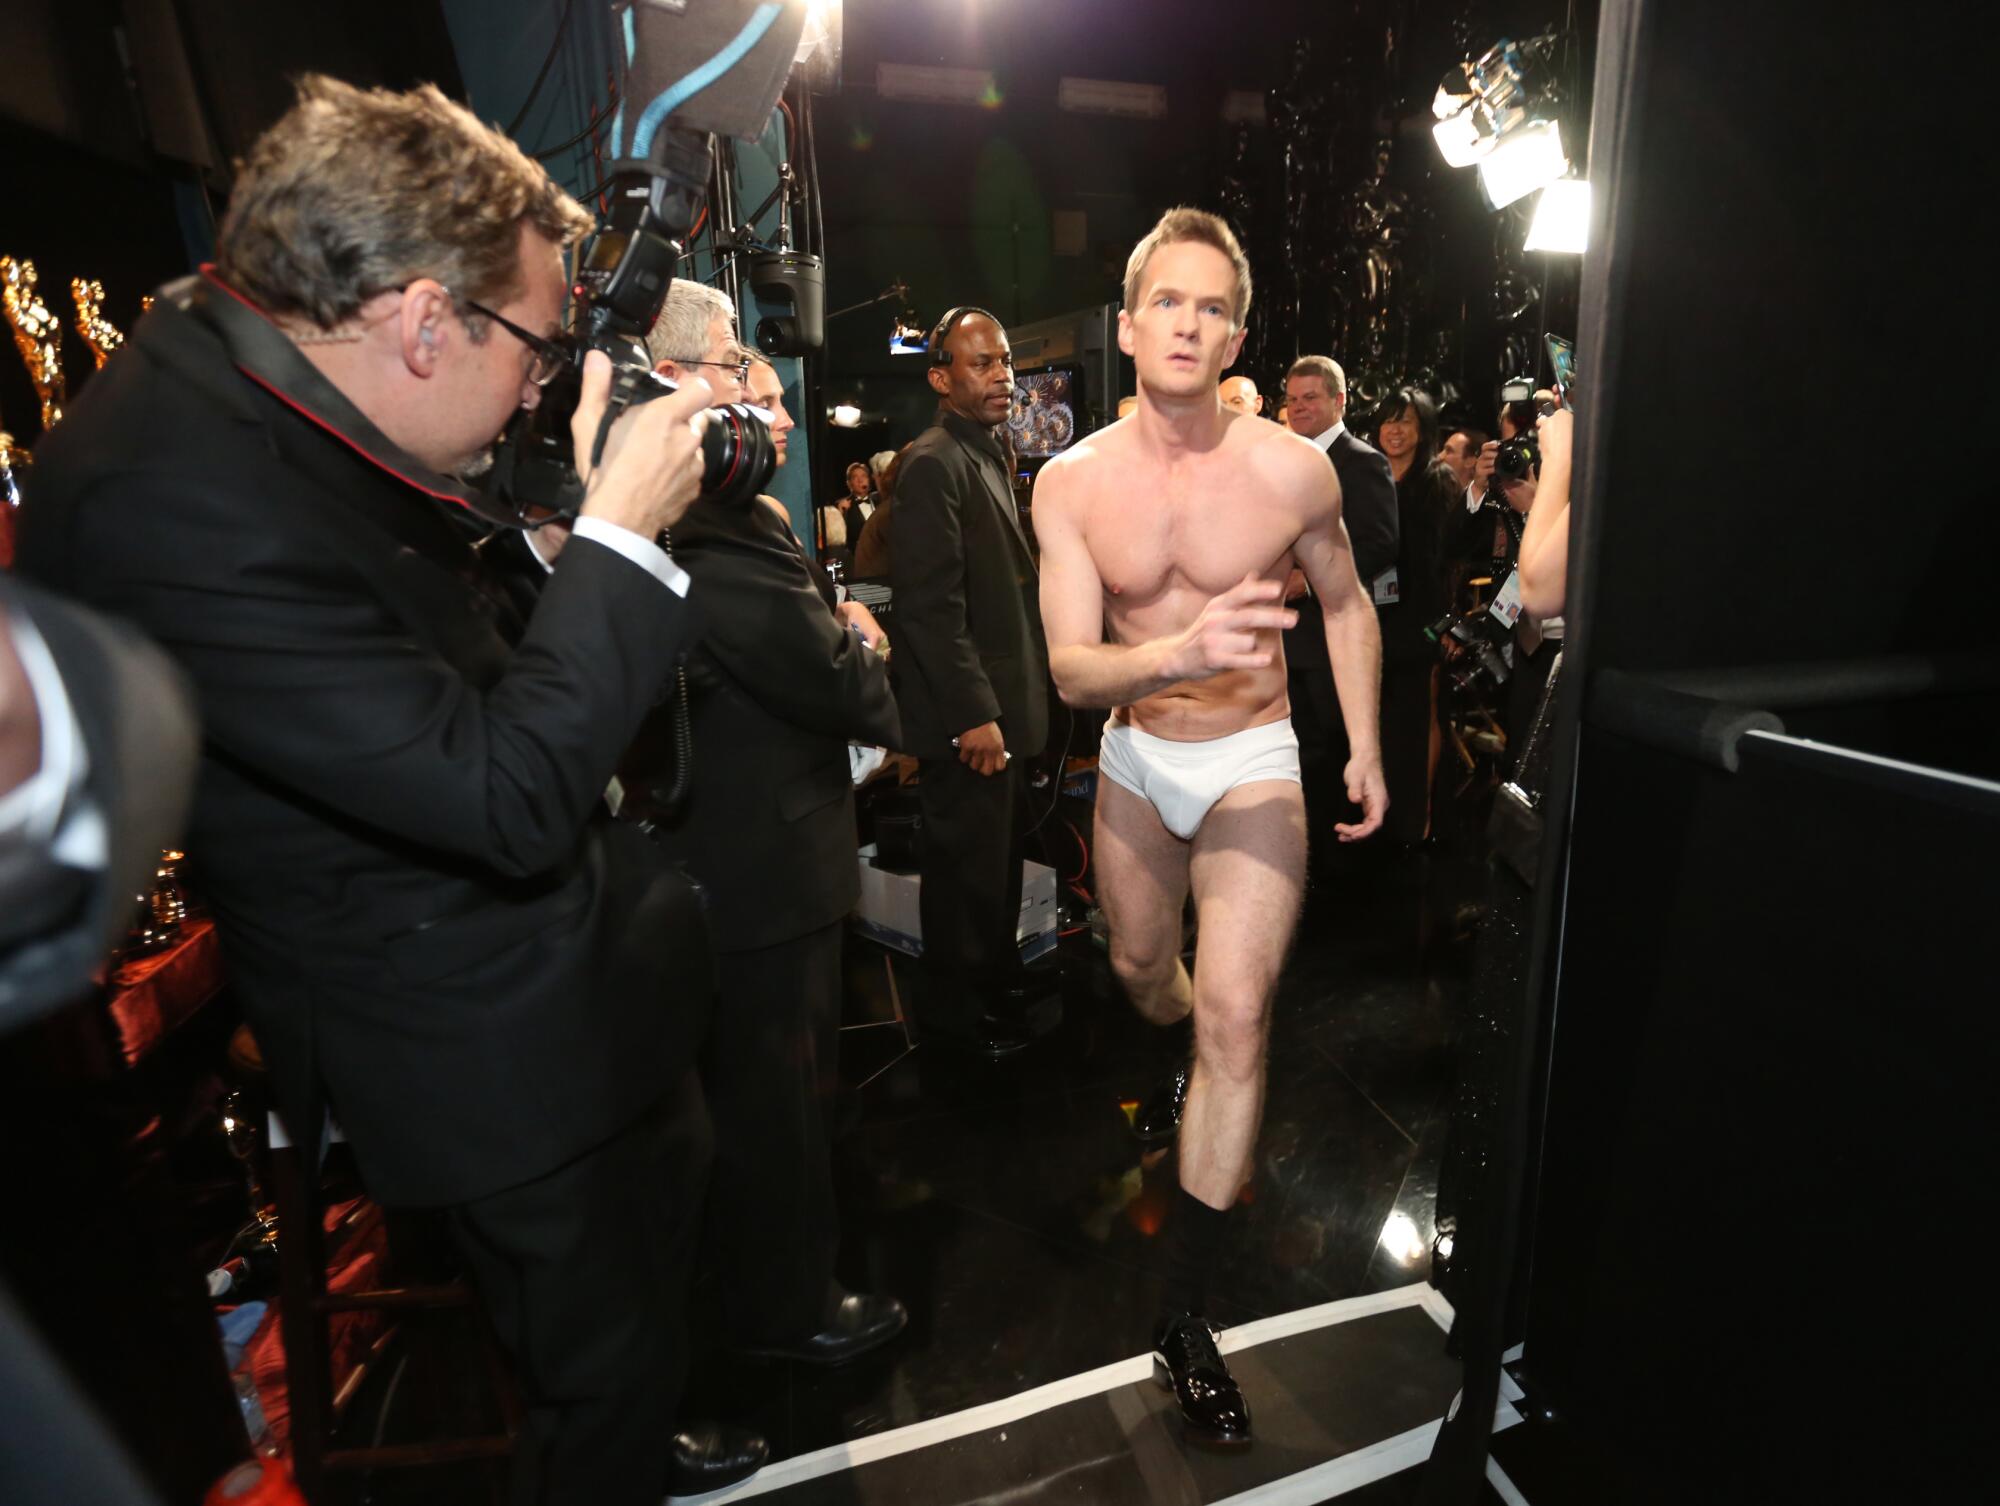 2015: Neil Patrick Harris heads onstage in his tighty whities